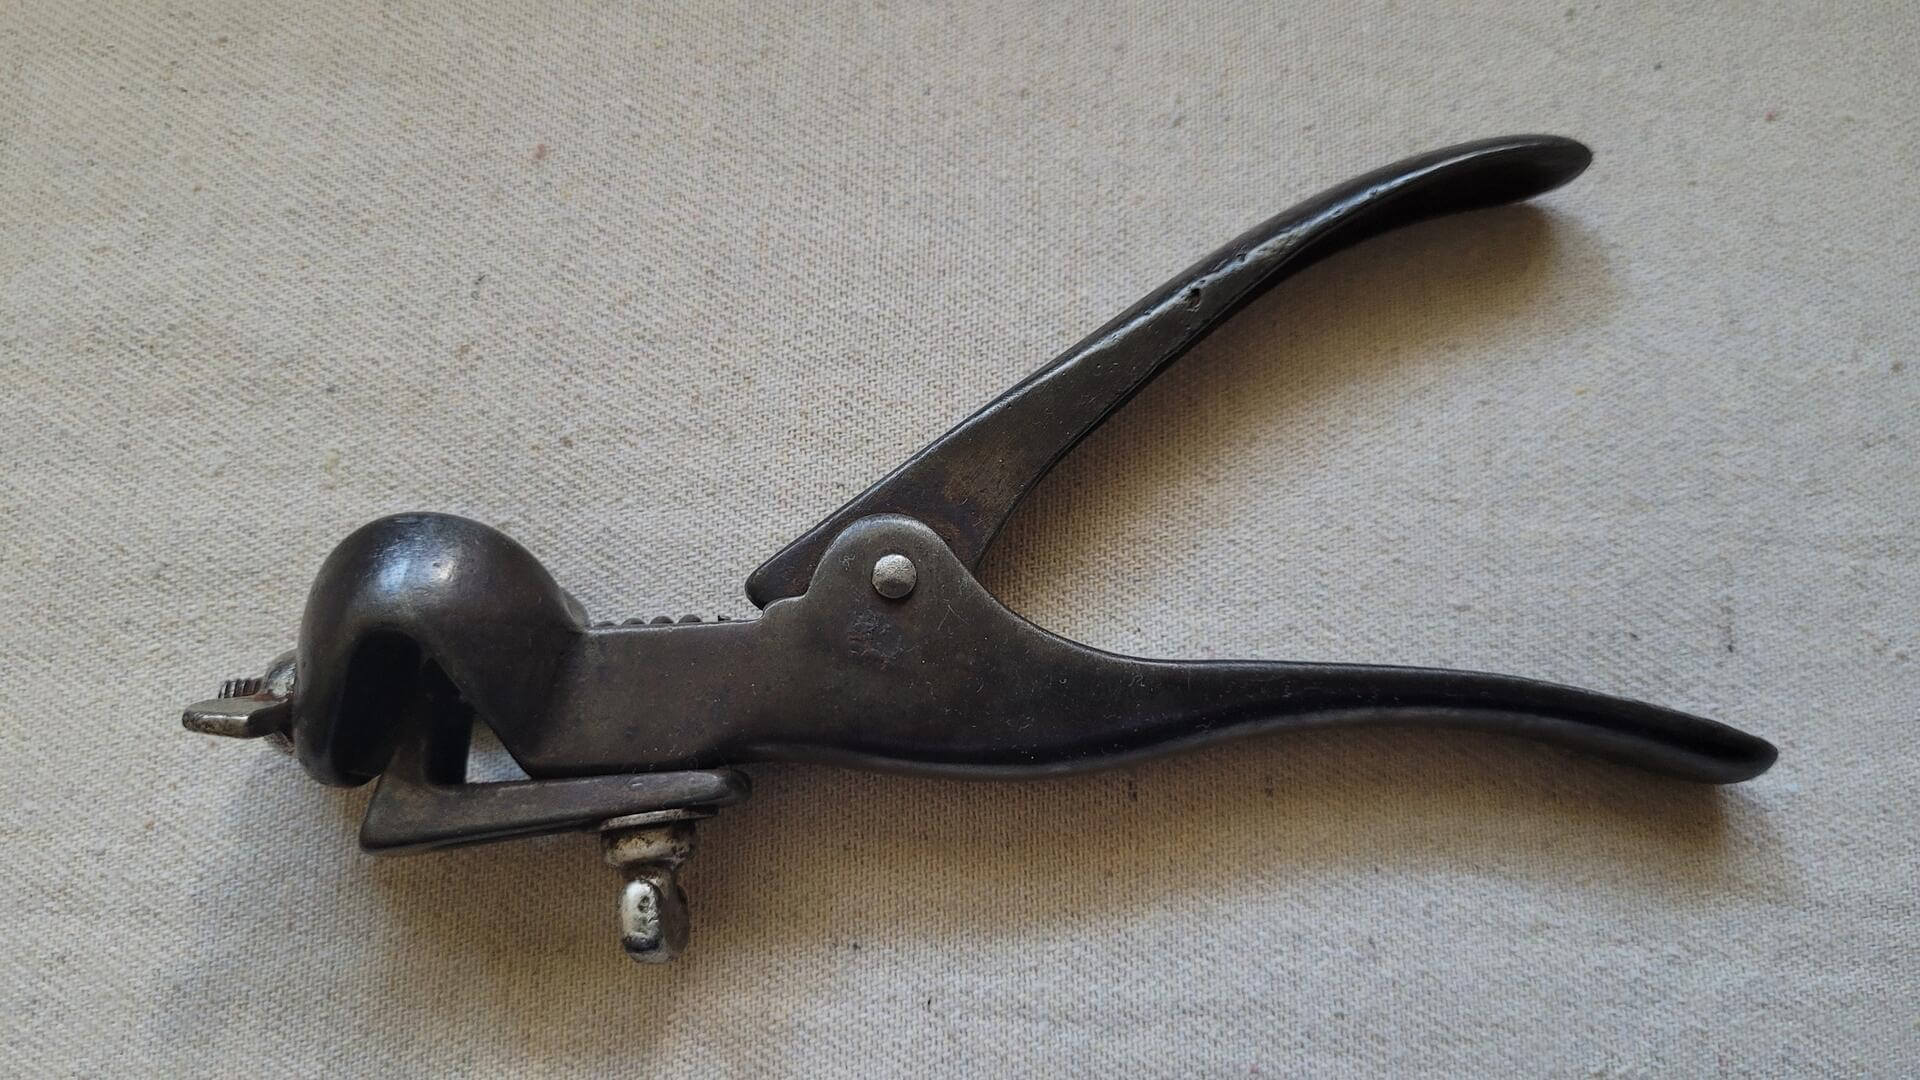 Nice vintage woodworking and carpentry cast iron adjustable hand saw set pliers used to set distance the saw tooth is bent away from the saw blade. The magnitude of set determines the cut width and prevents the blade of the saw from binding in the wood.